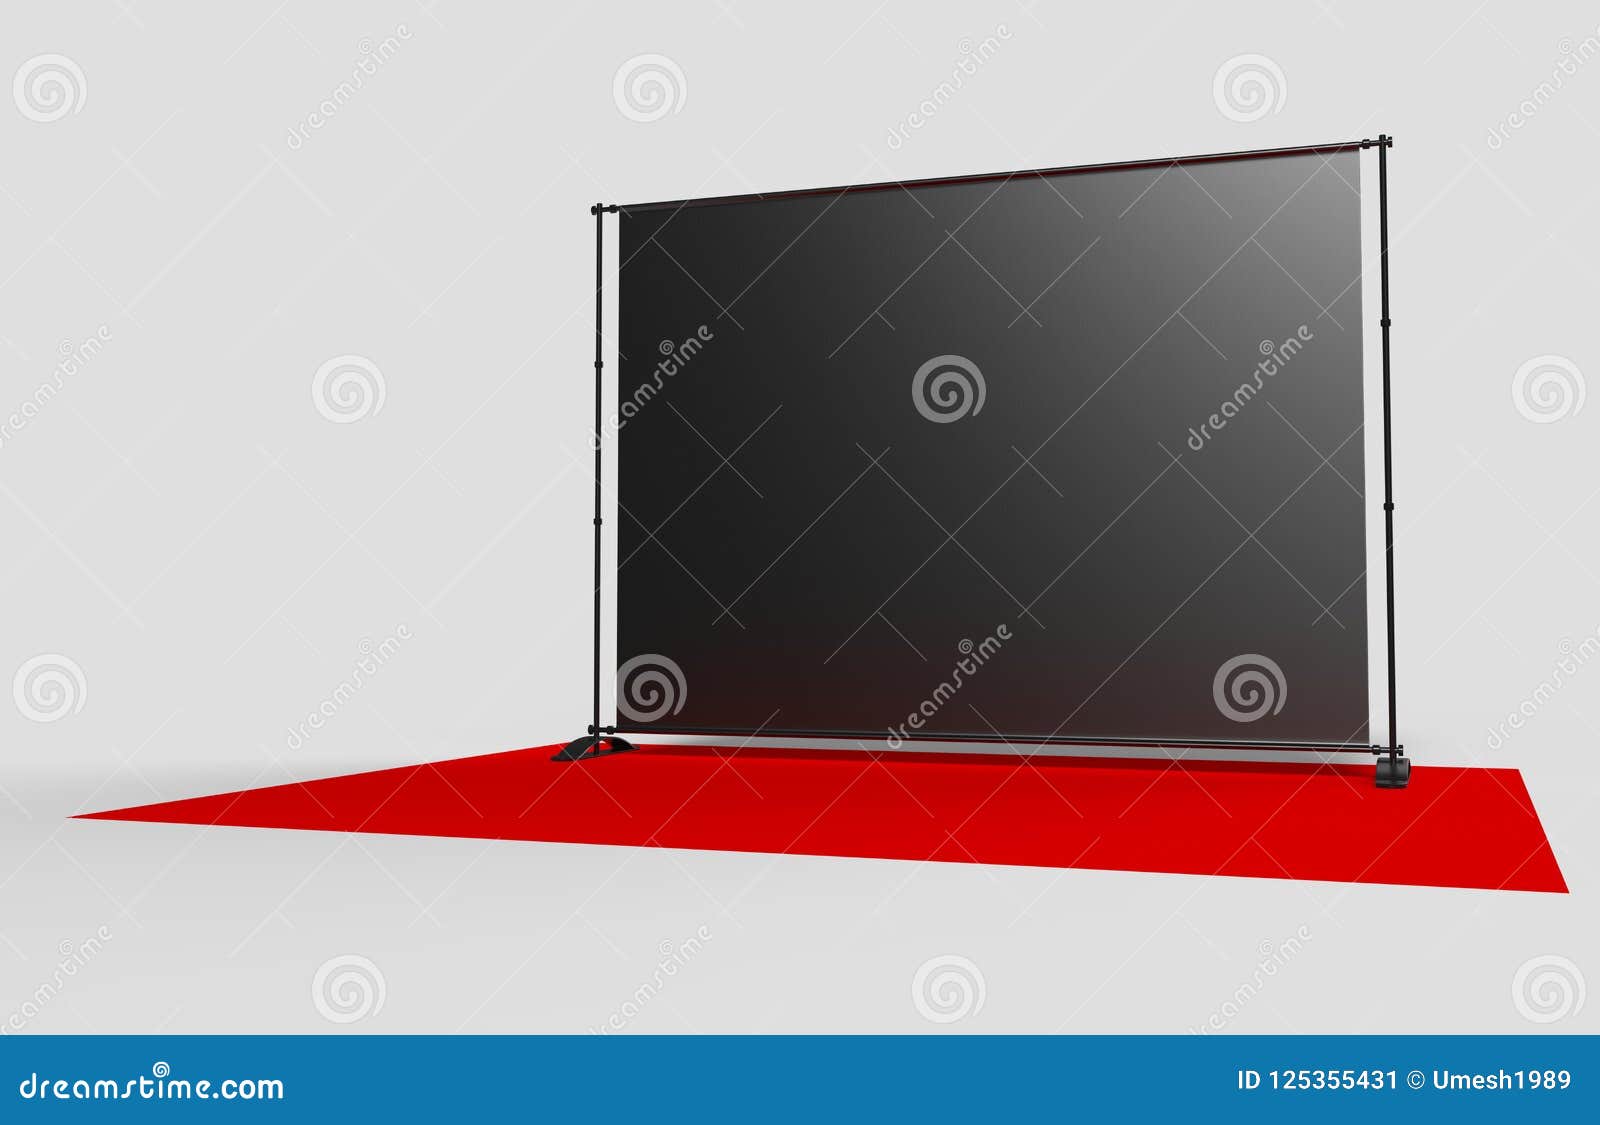 Download Blank Step And Repeat Telescoping Backdrop Banner. 3d ...